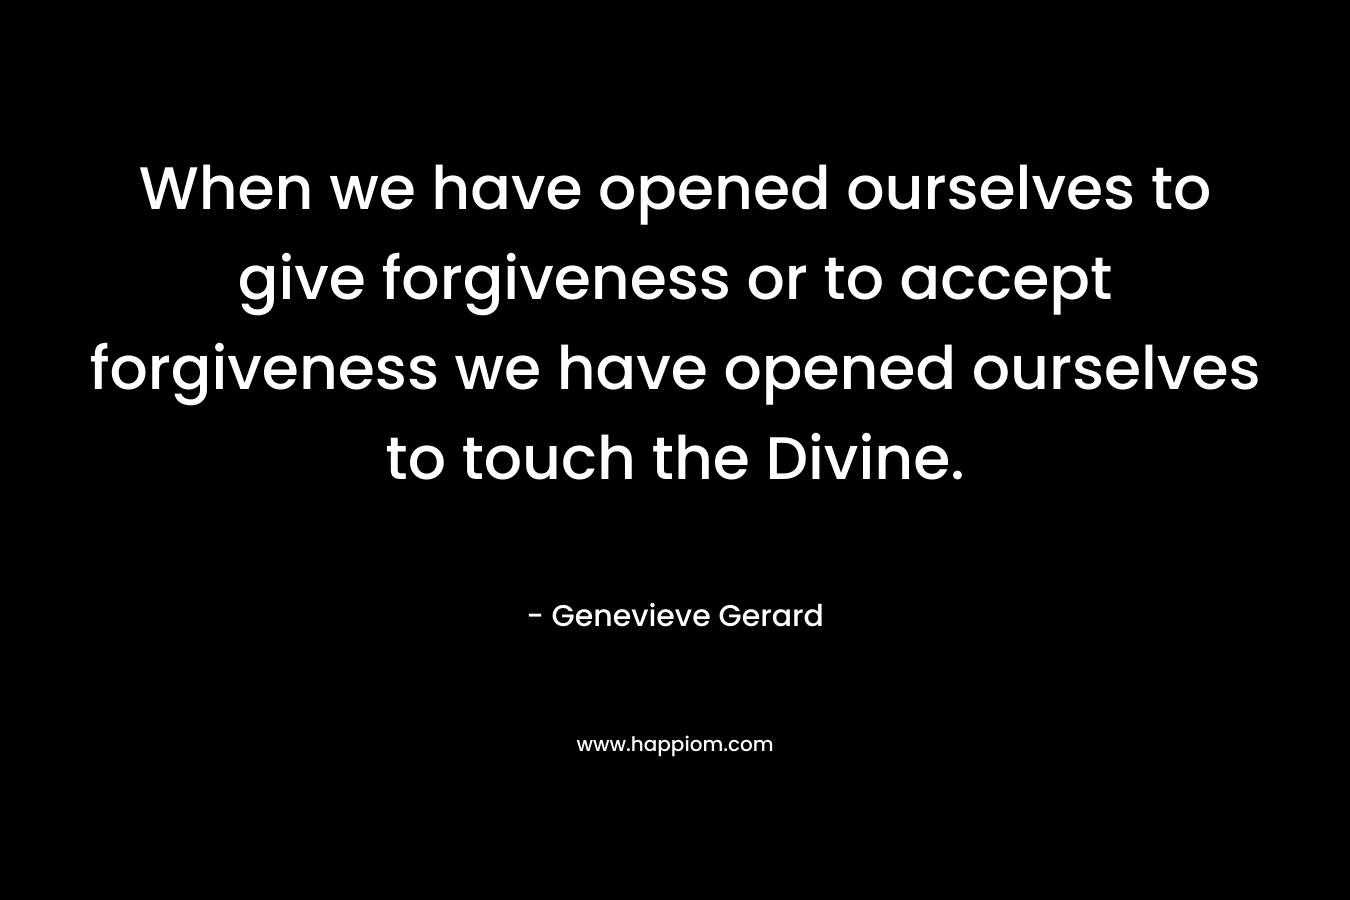 When we have opened ourselves to give forgiveness or to accept forgiveness we have opened ourselves to touch the Divine. – Genevieve Gerard